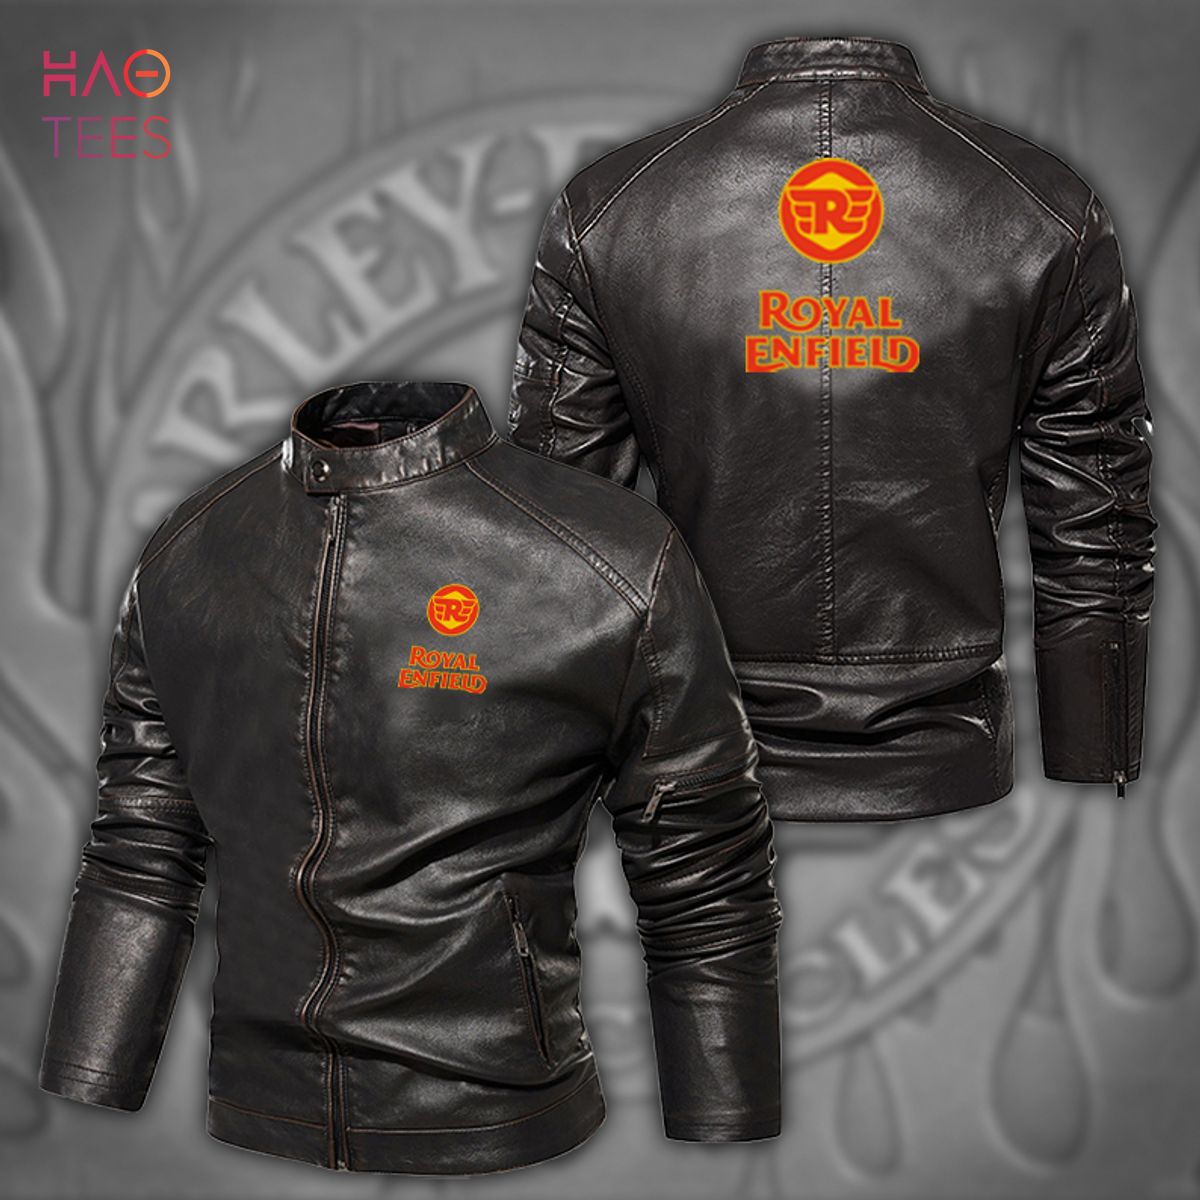 Royal Enfield India Men's Limited Edition New Leather Jacket